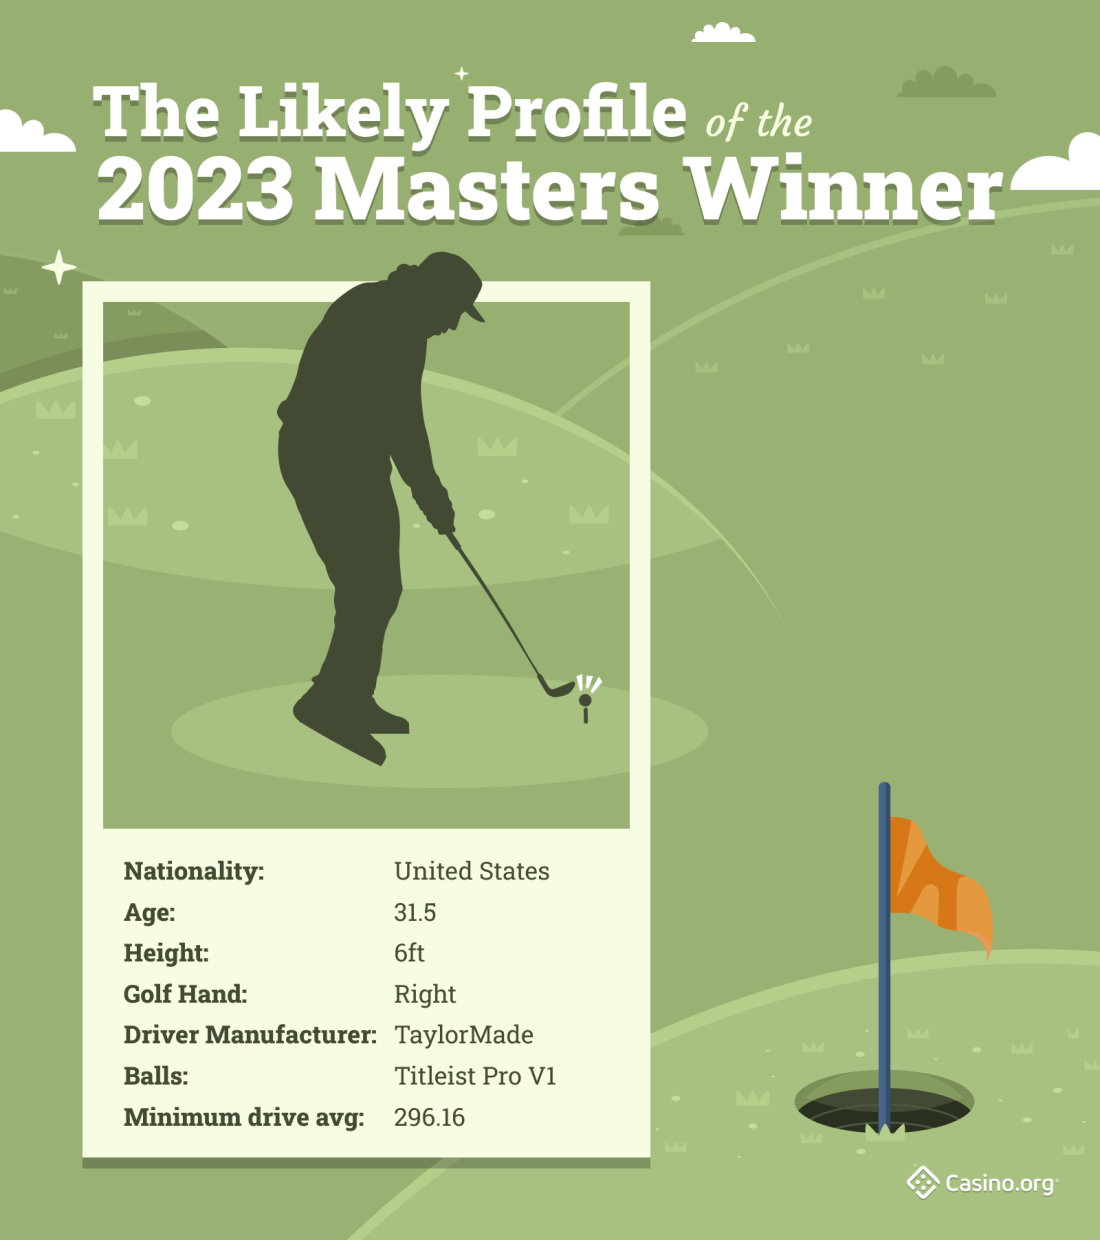 20 Years of Masters Data What Does a Winner Look Like?